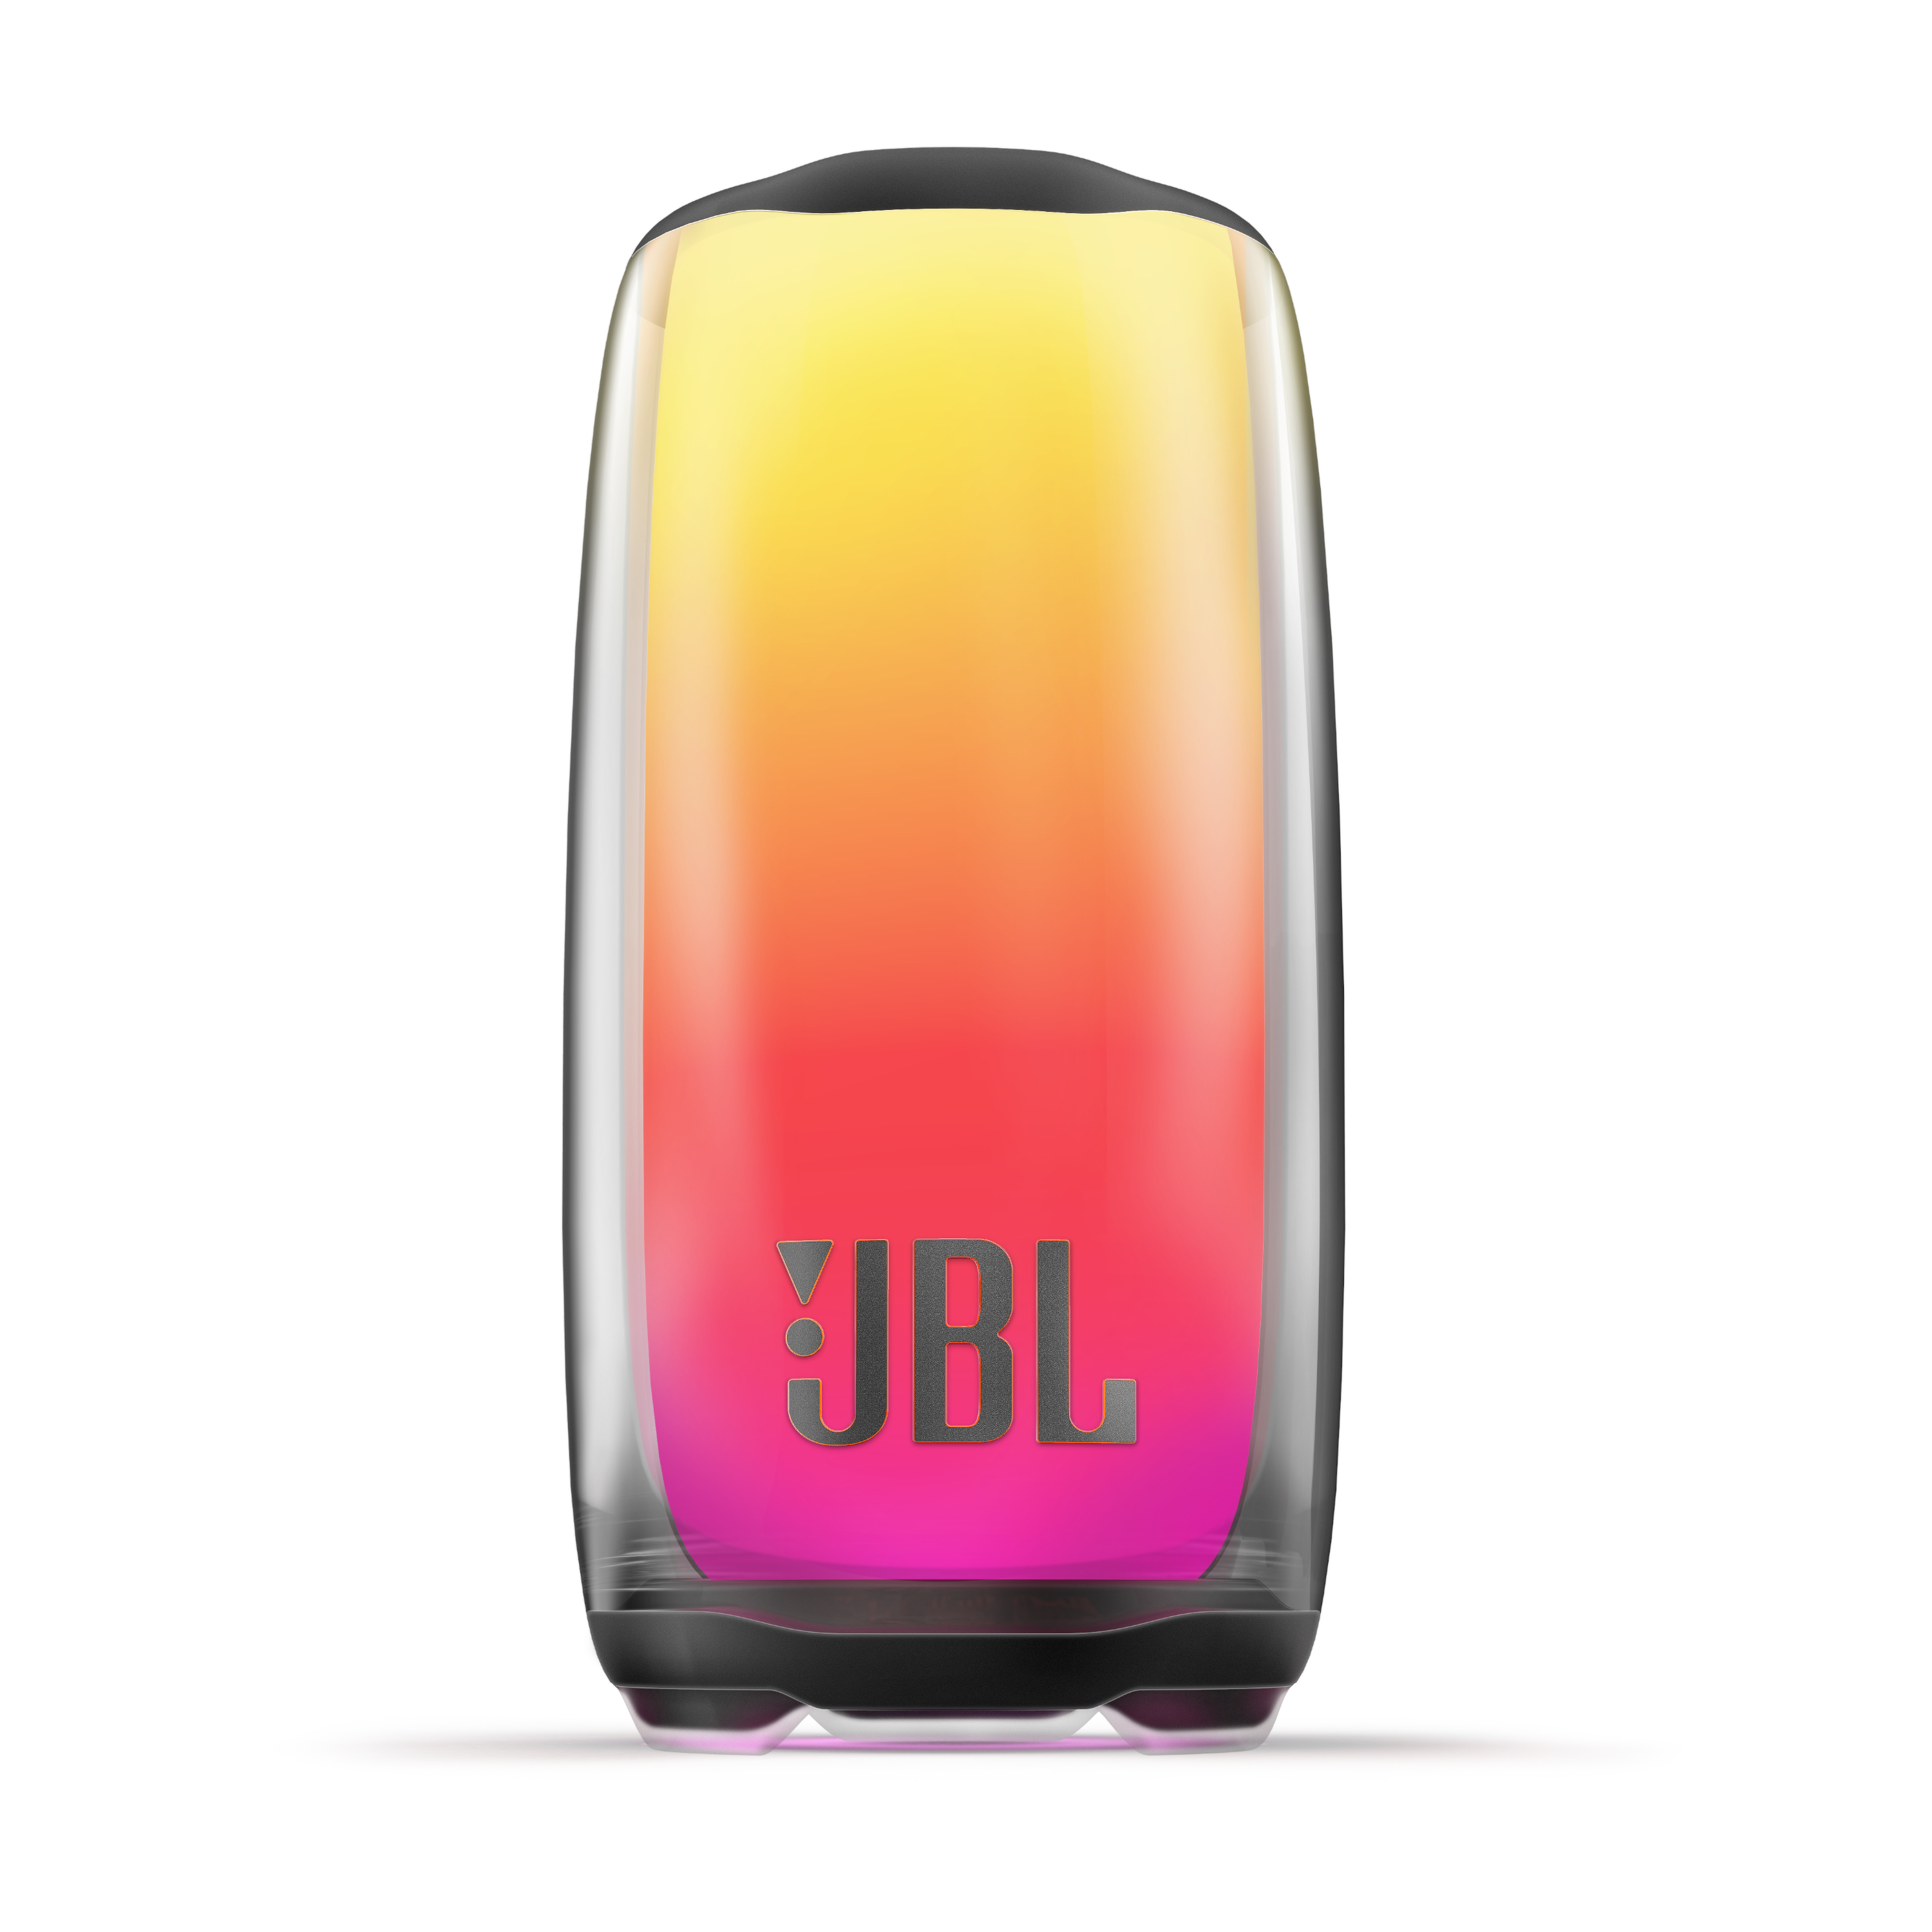 Light up the Listening Experience with the Newly Designed JBL® Pulse 5